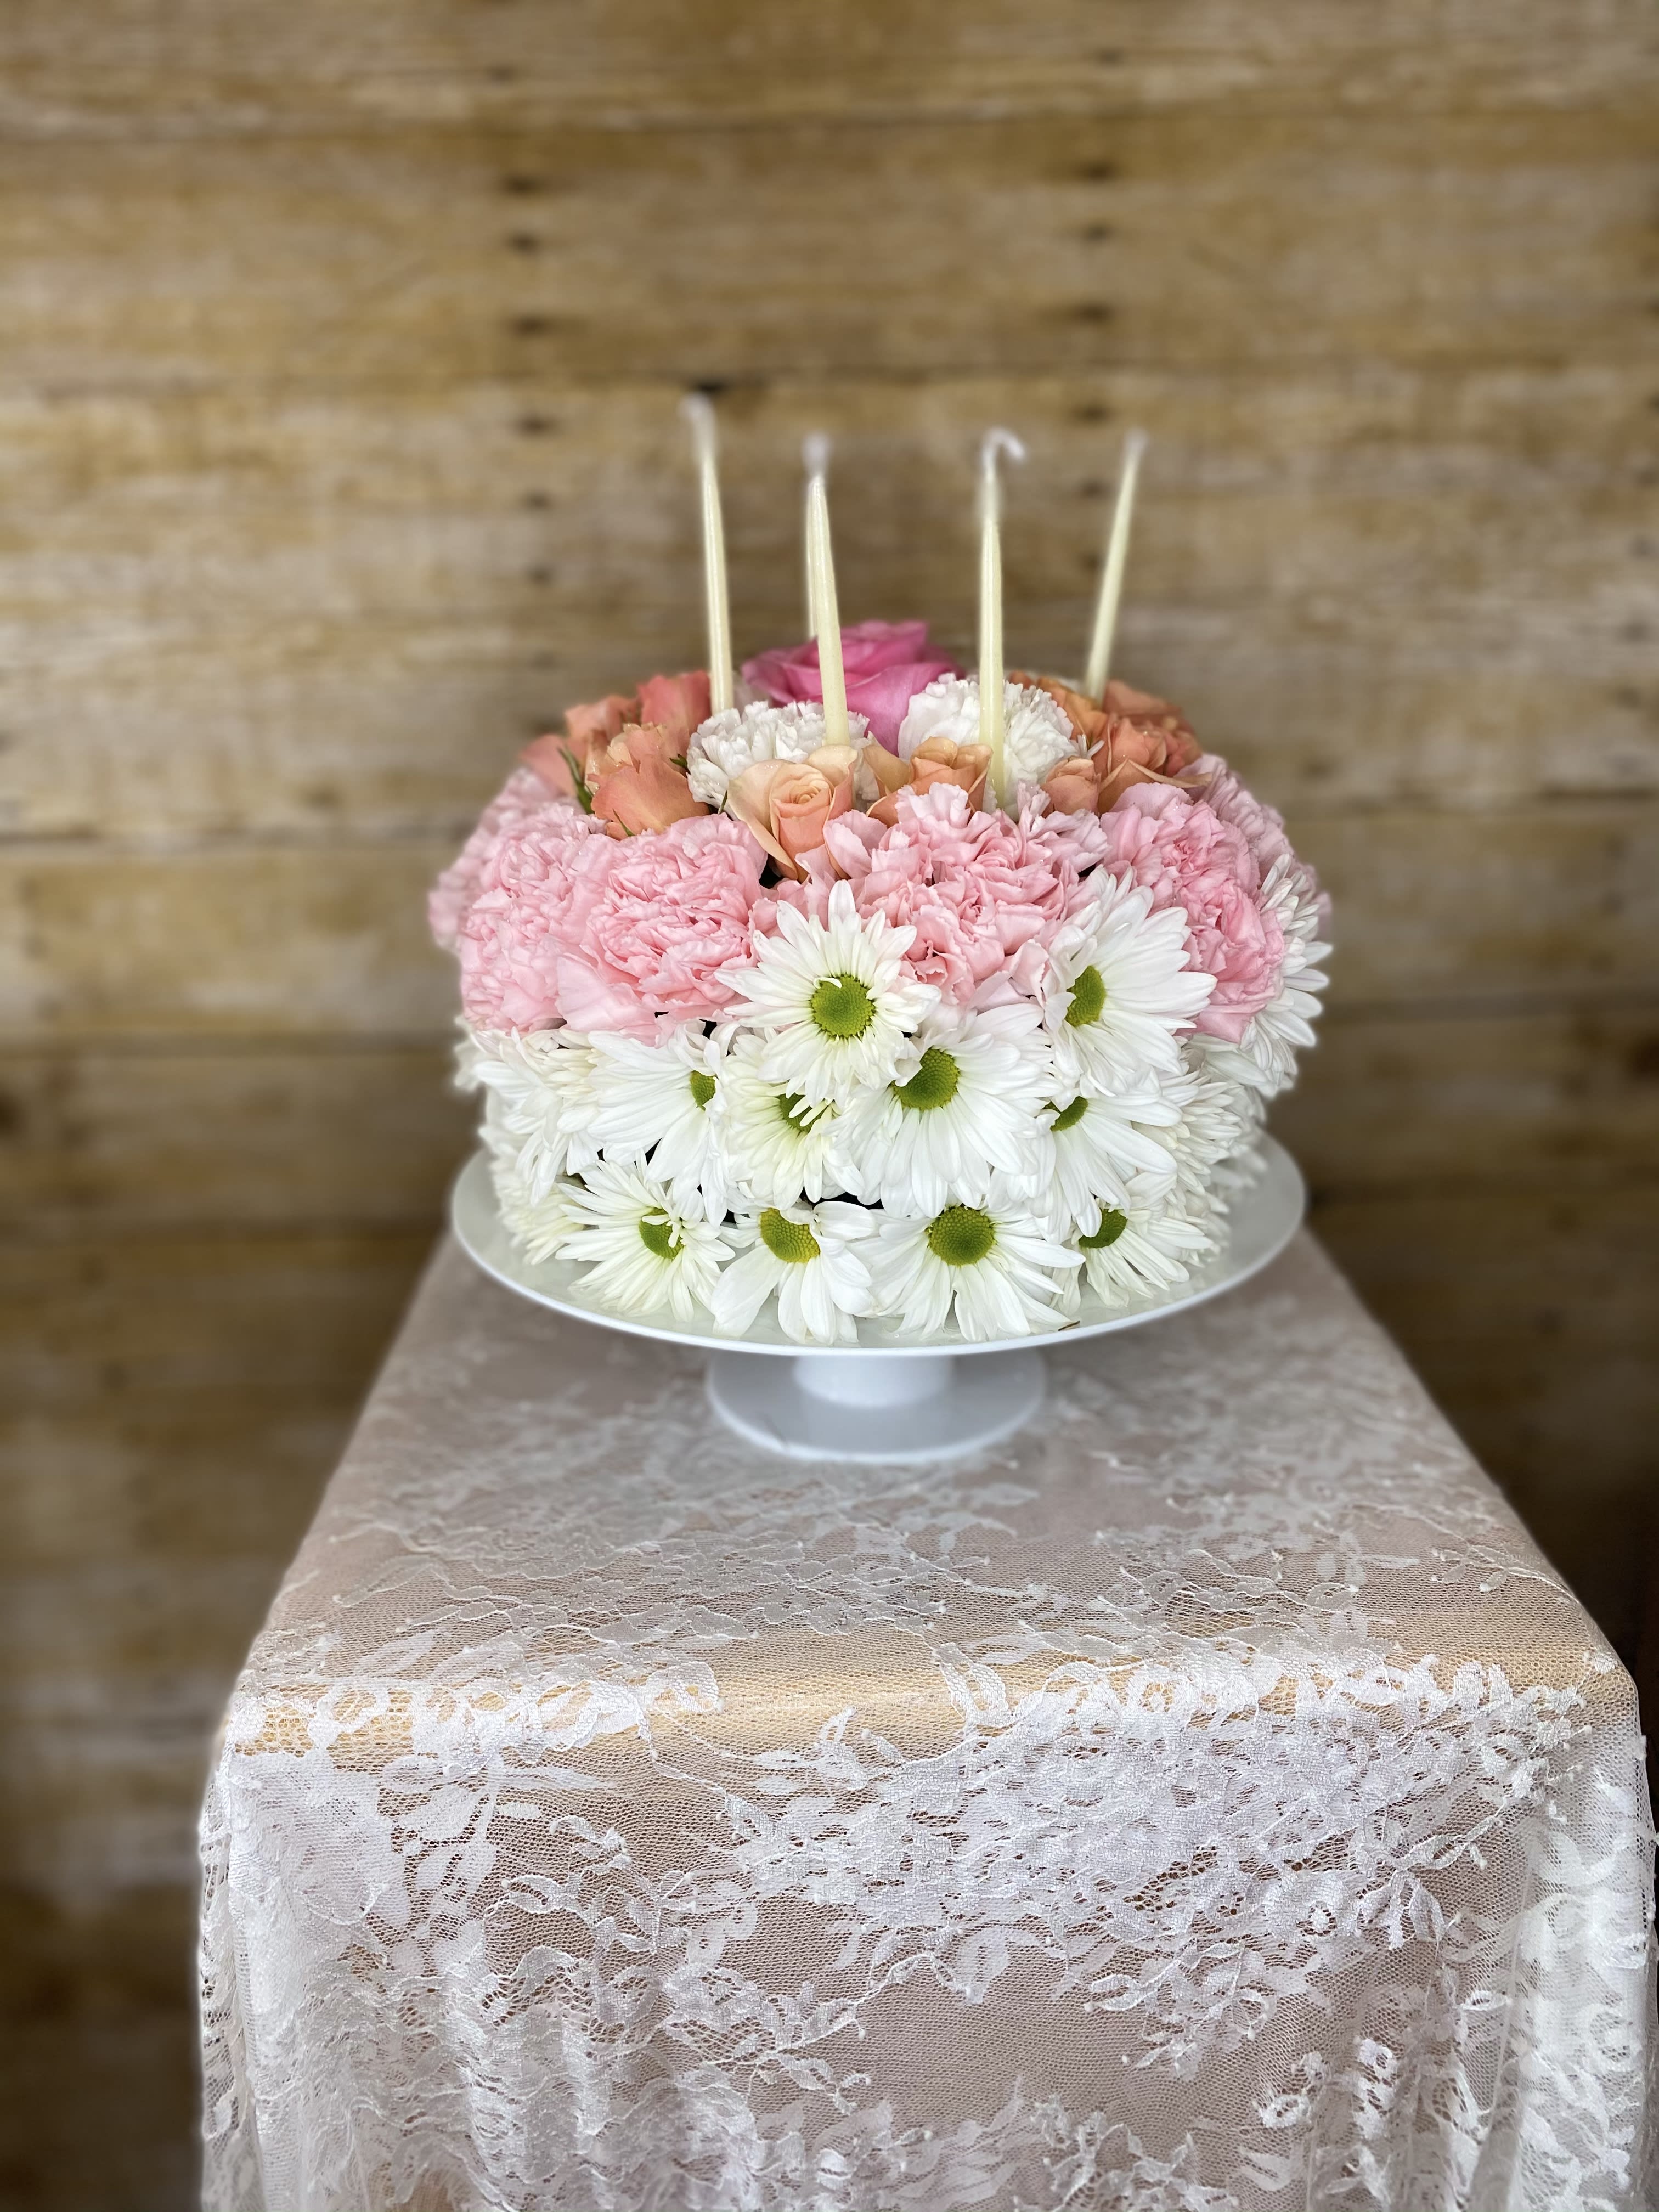 Warm Wishes Floral Cake (colors will vary) - This Floral Cake is set to celebrate their birthday with sweet surprise. Perfectly arranged in the shape and styling birthday cake presented on a white cake plate, this memorable flower arrangement will add to the festivities of their special day.